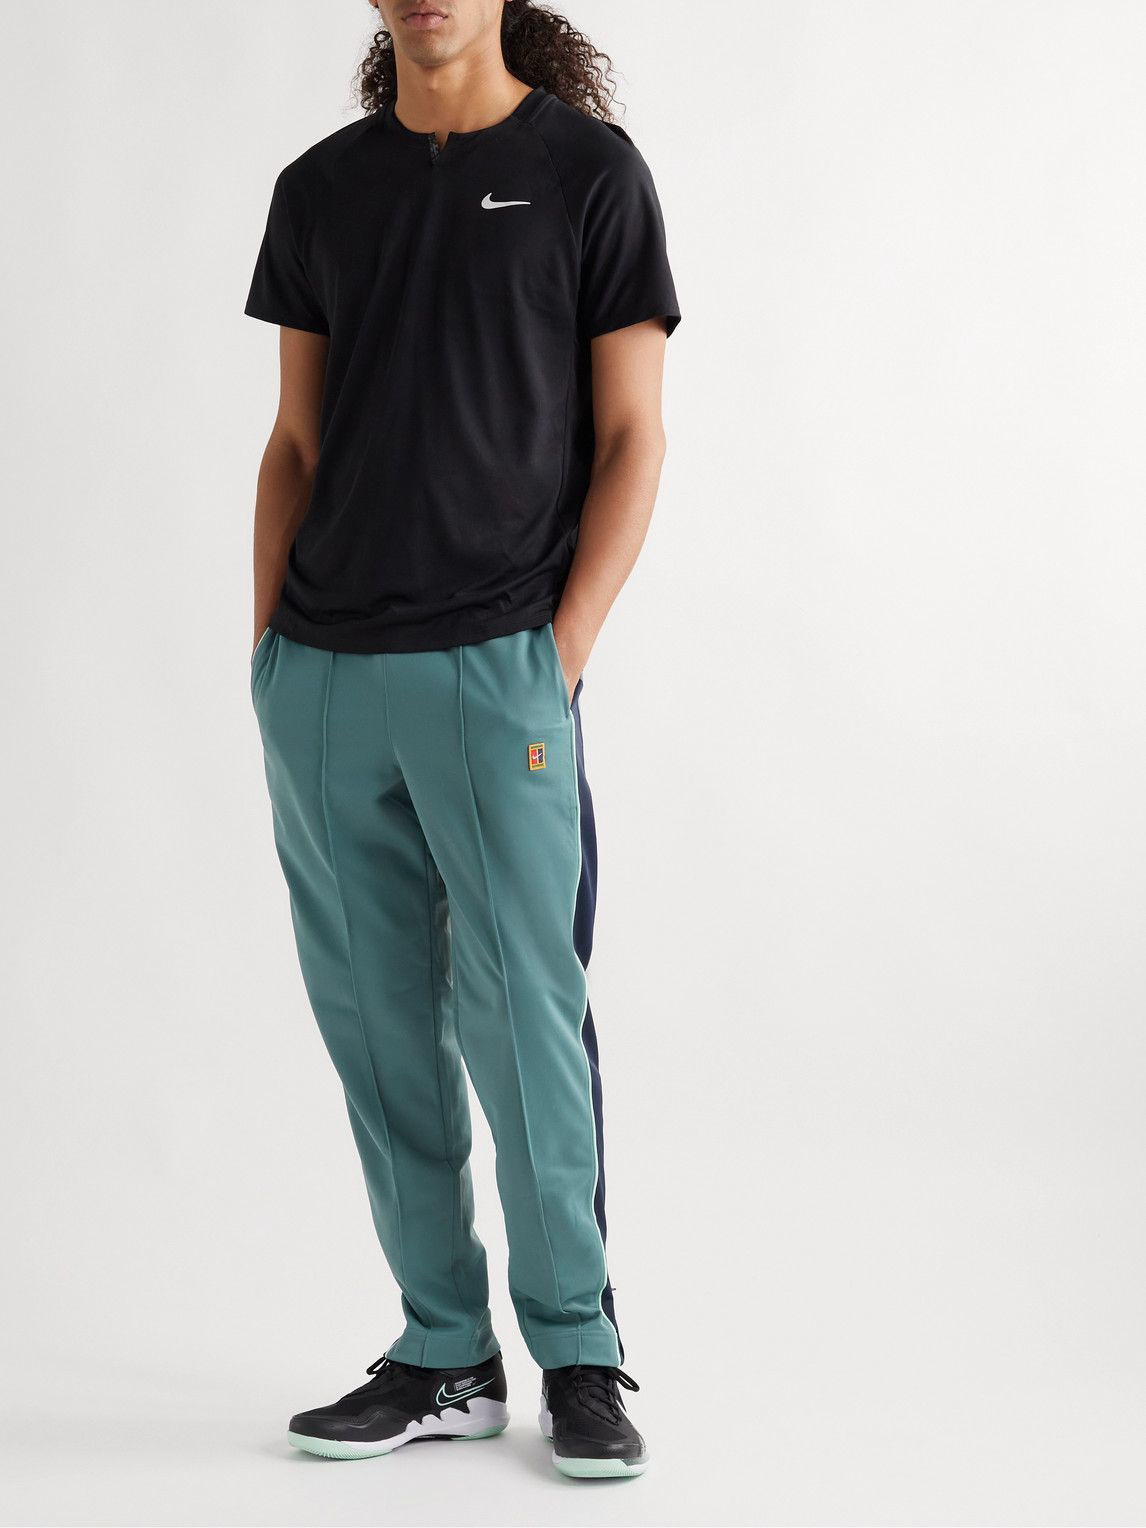 adidas Melbourne Woven Tennis Trousers (Ladies) - Black – stringsports.co.uk